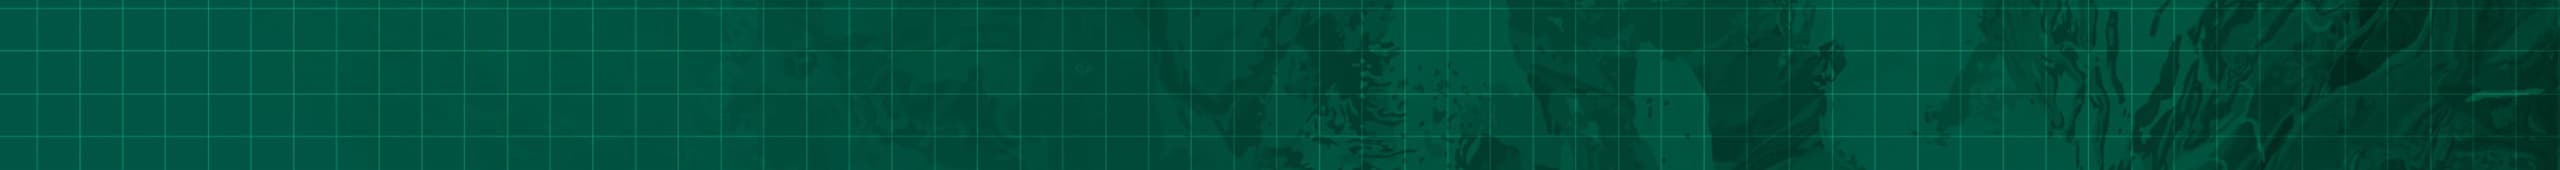 Dark green grid background over a portion of a world map in lighter green